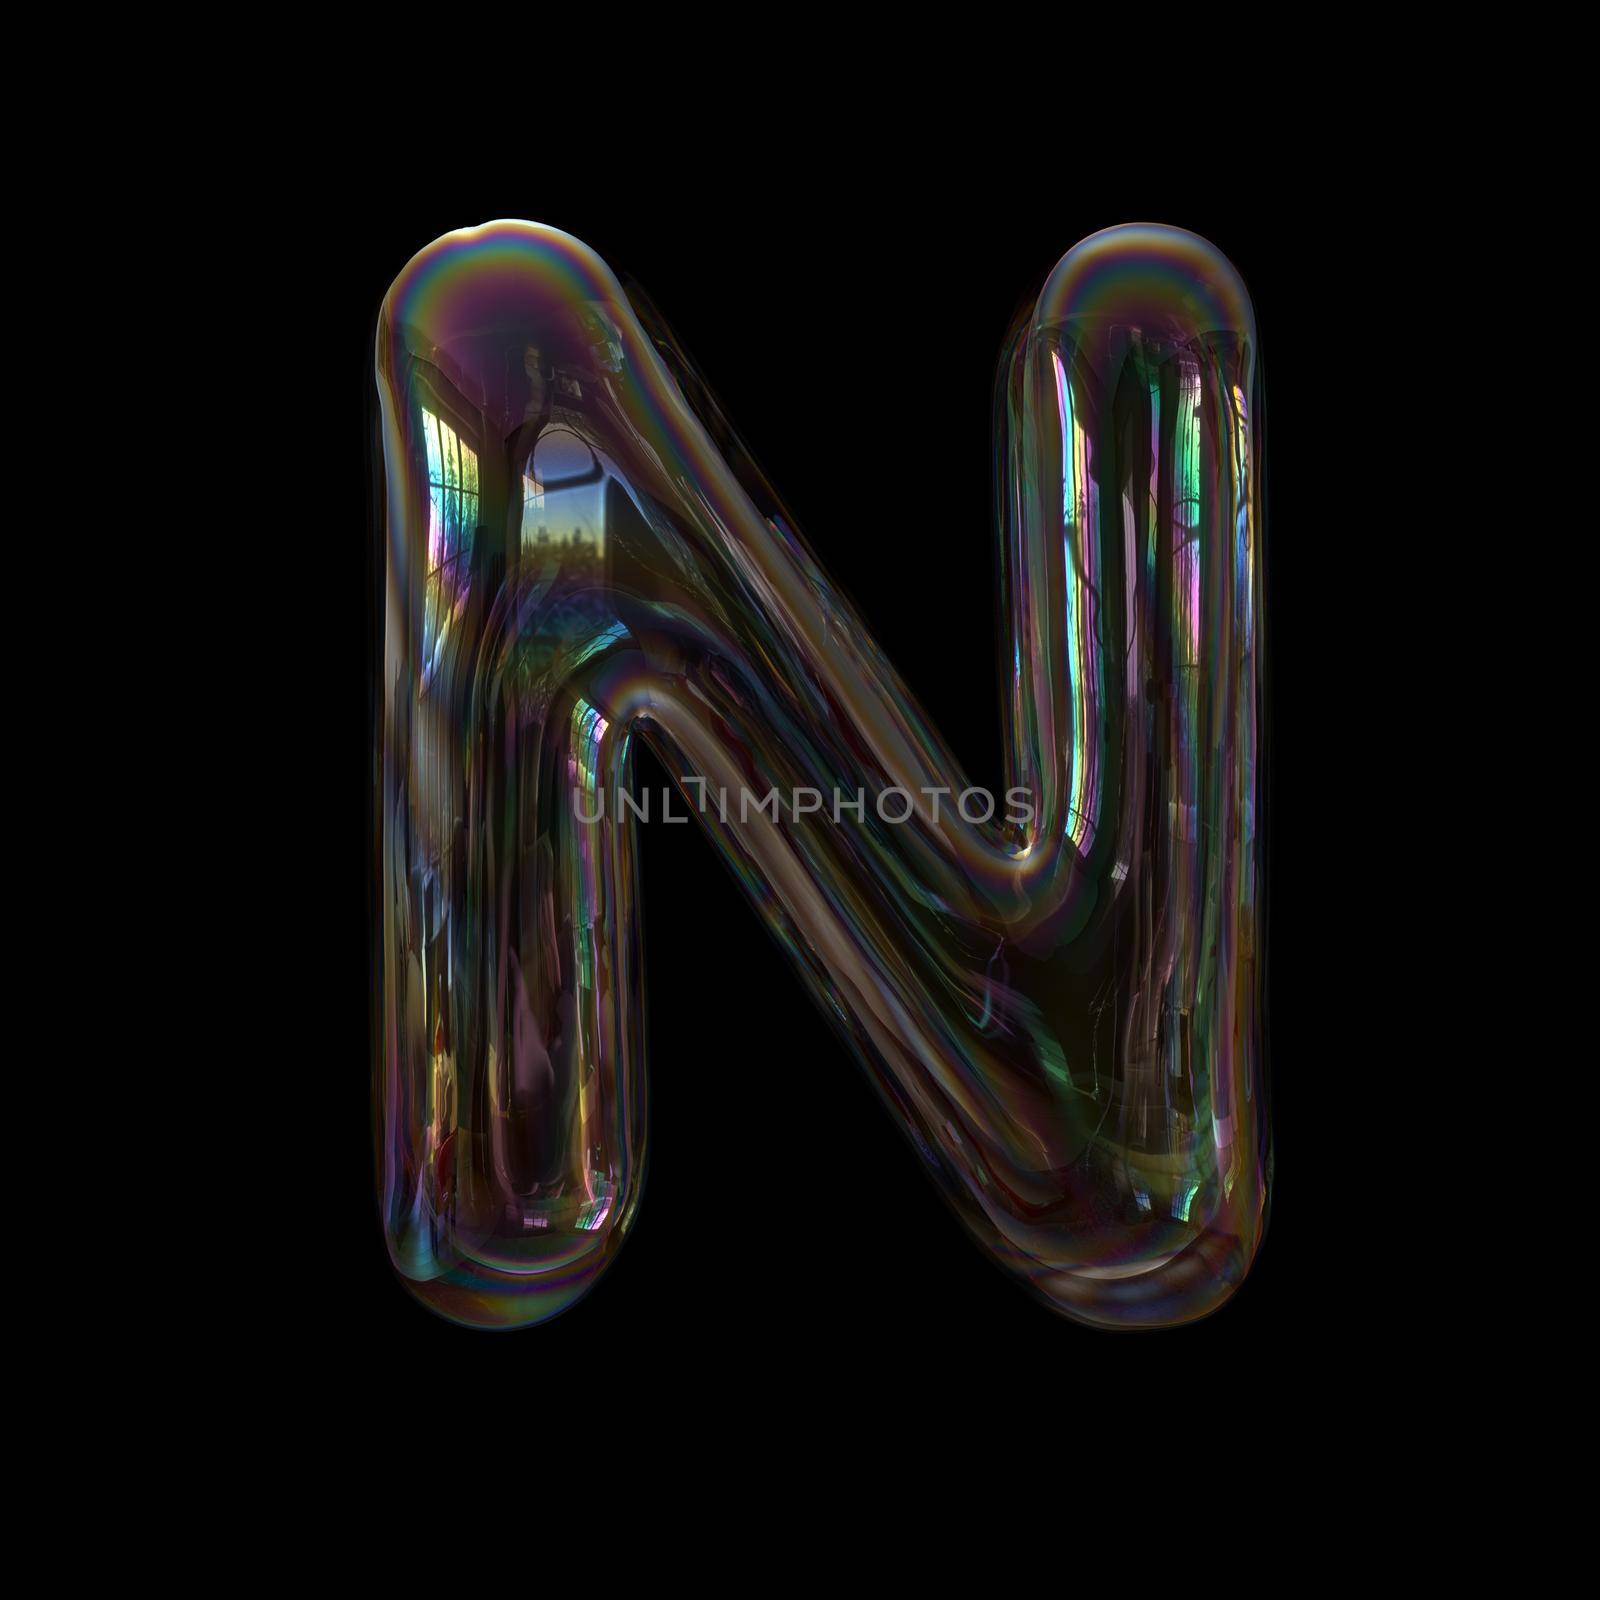 bubble writing alphabet letter N - Upper-case 3d font isolated on a black background.
This 3d font collection is well-suited for various creative projects including but not limited to : Childhood. events. nature...